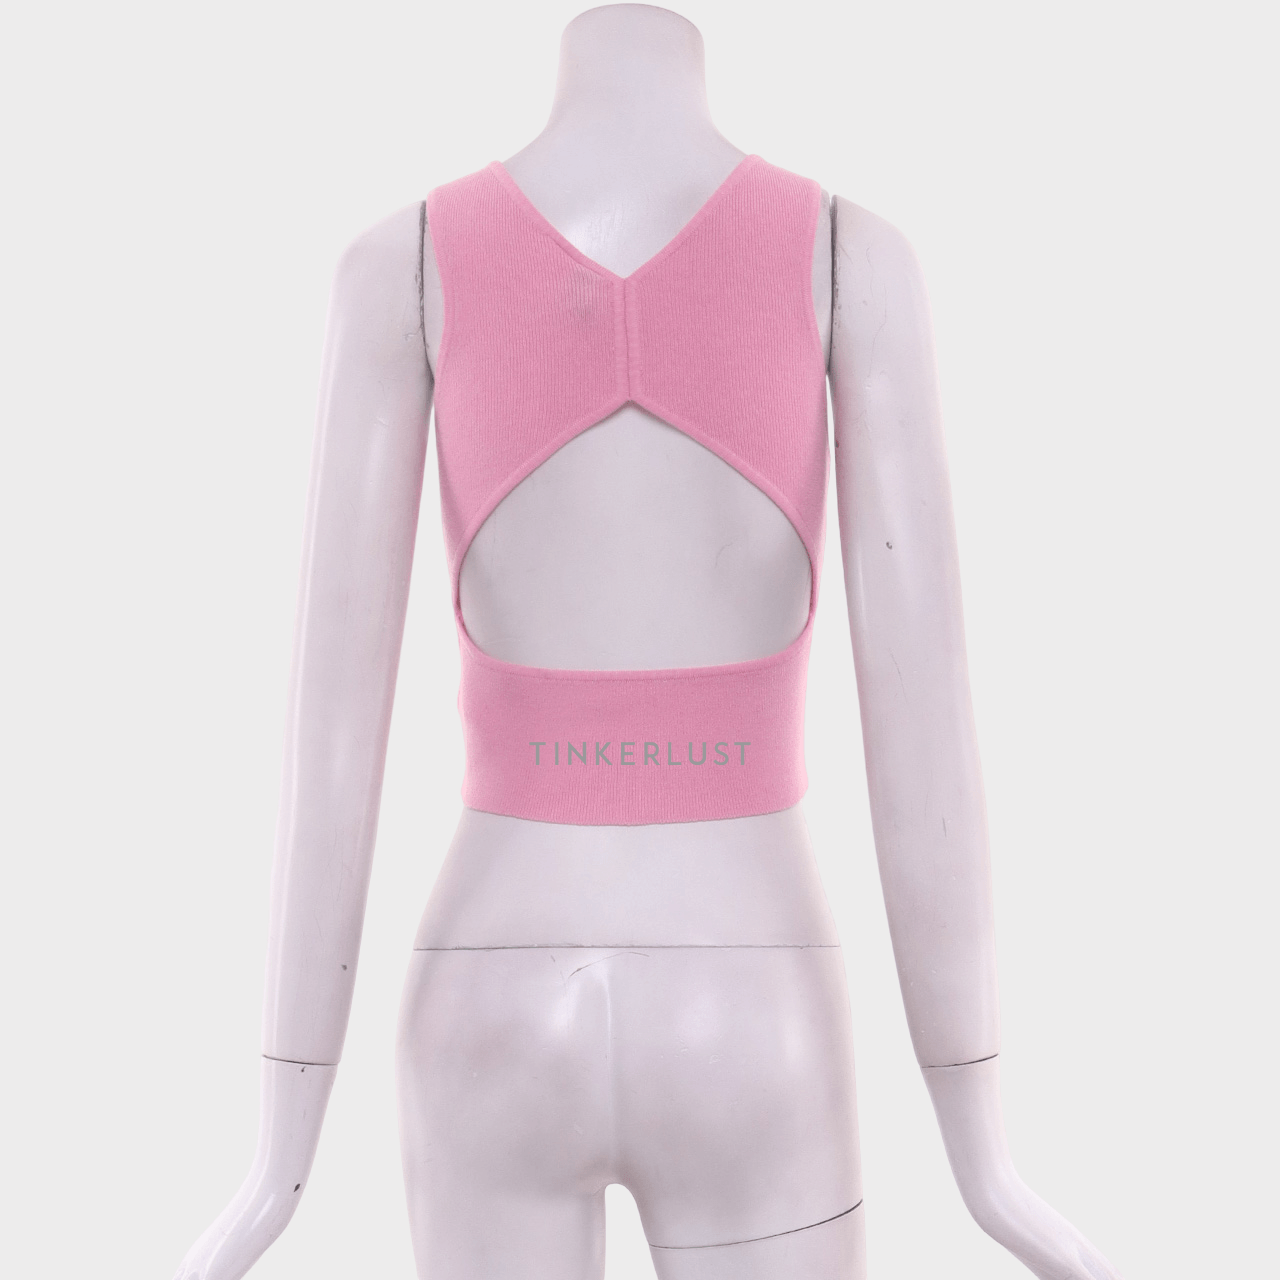 H&M Pink Back Cut Out Sleeveless